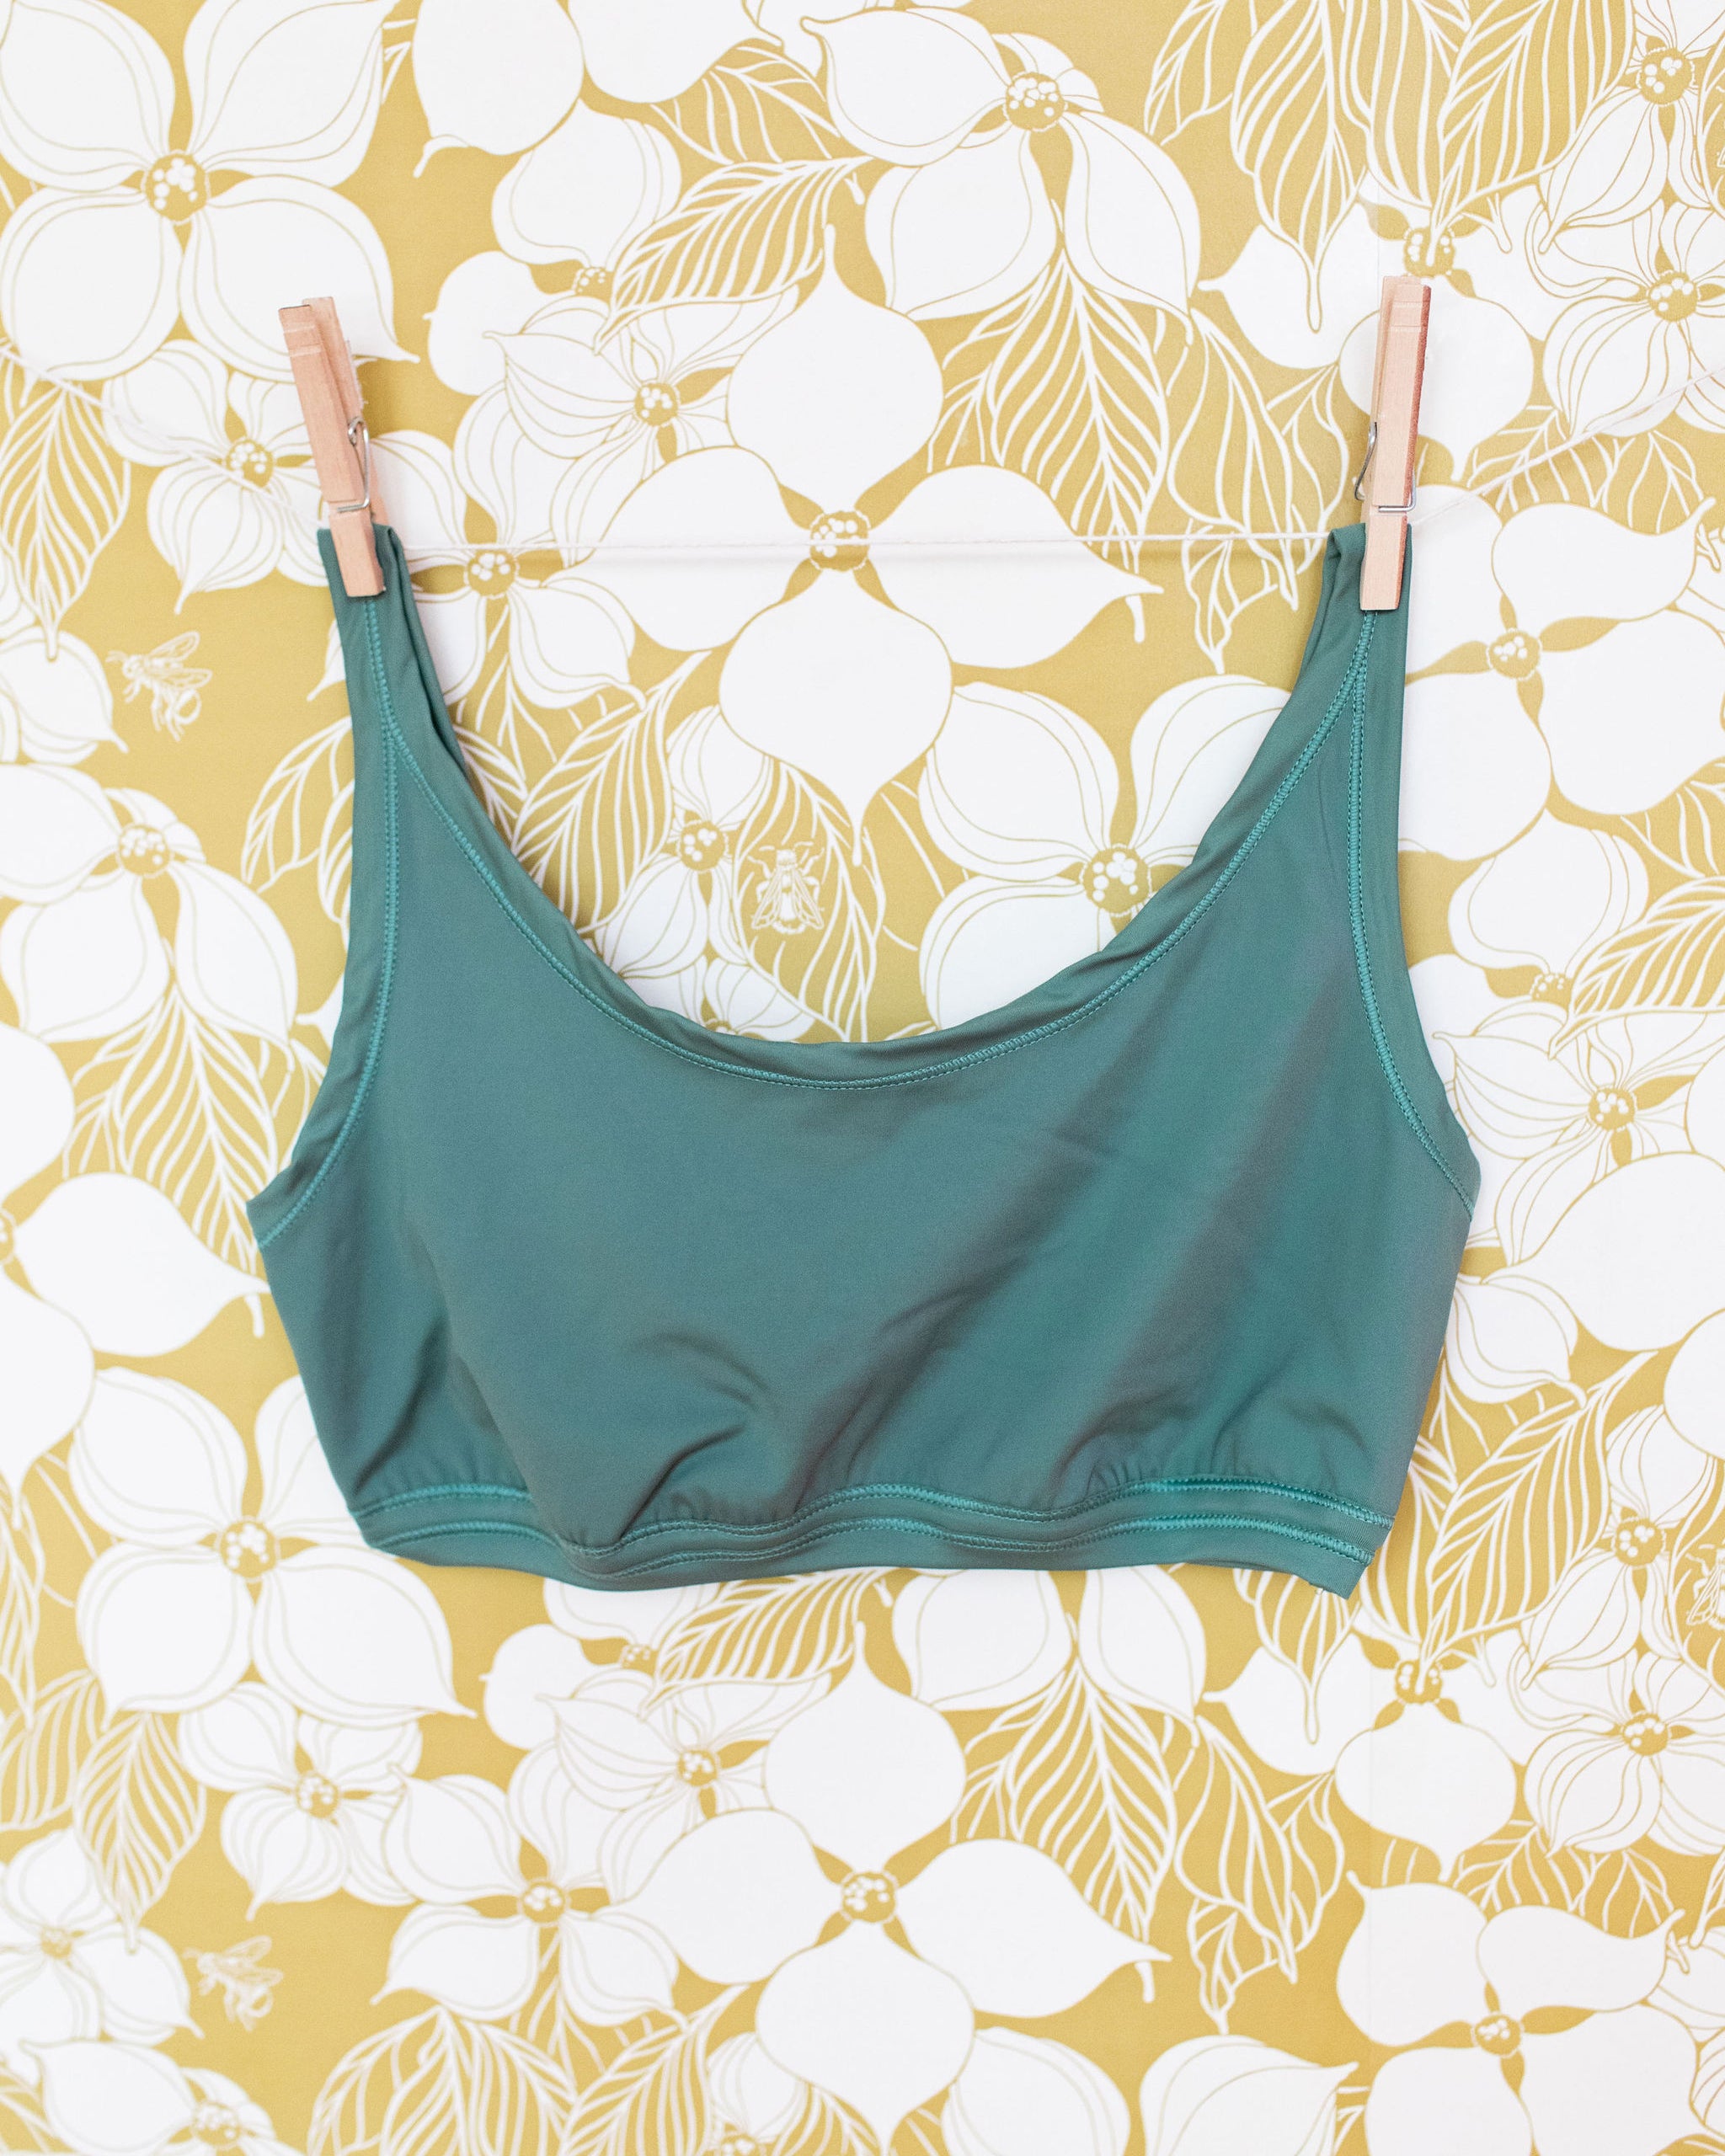 Swimwear Top in Lichen Green hanging with clothes pins on a floral wall.